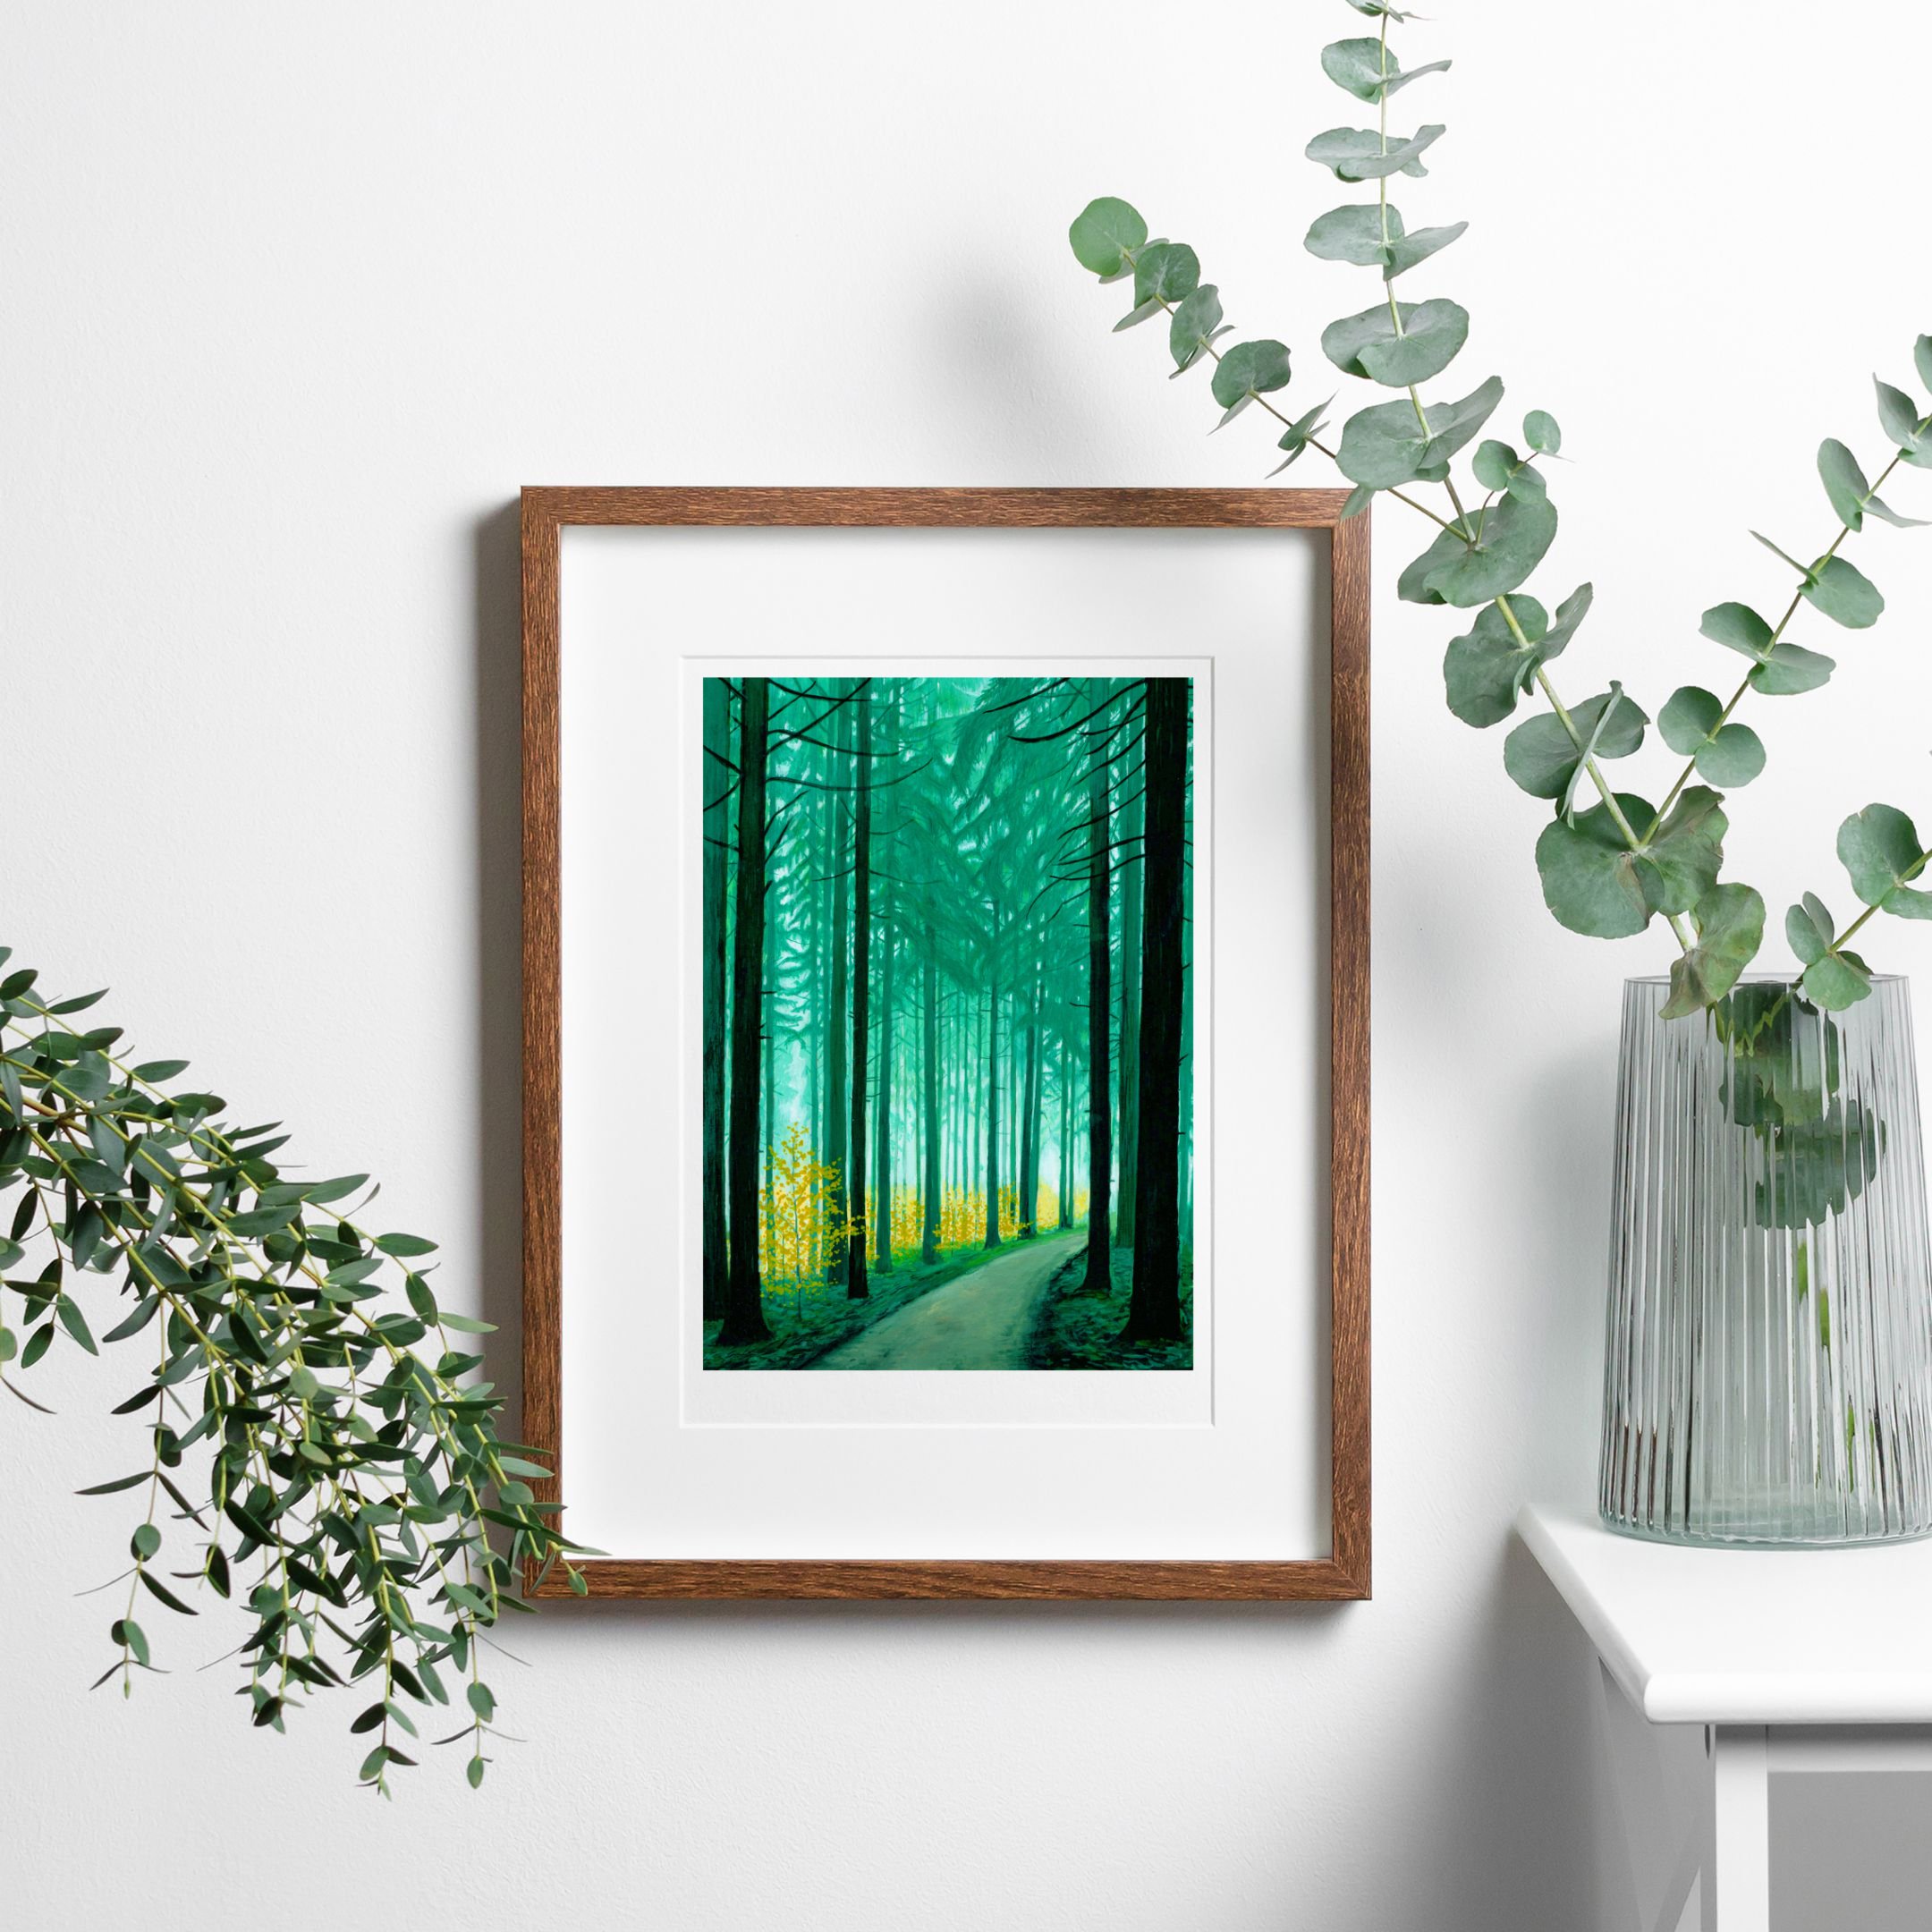 into the forest frame on wall white background.jpg